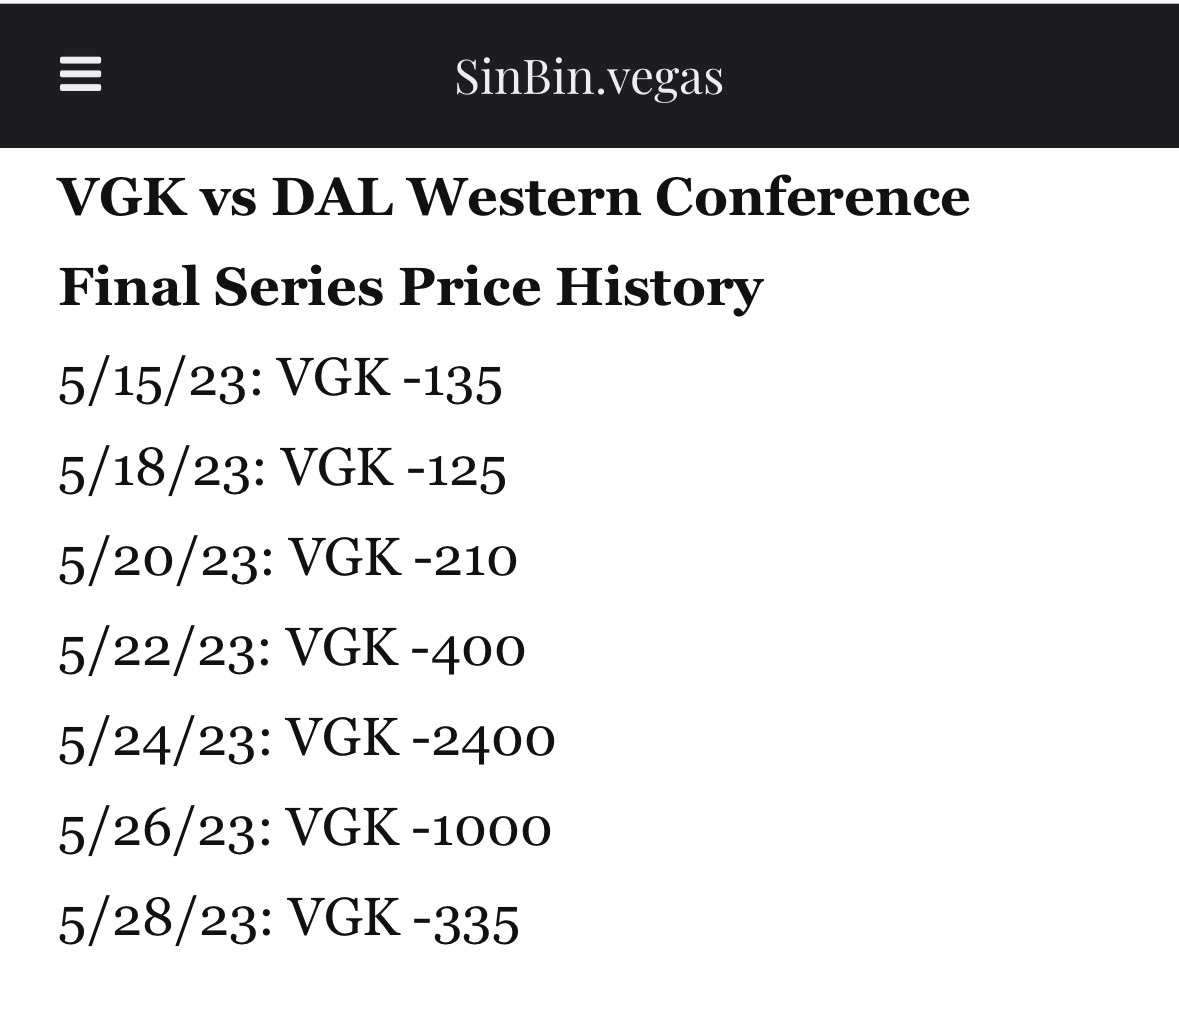 VGK open as underdogs at @WilliamHillUS in the First Round against Dallas. Last year this series vs DAL opened at -135. VGK opened as dogs in one of the four series last year (+140 vs EDM).